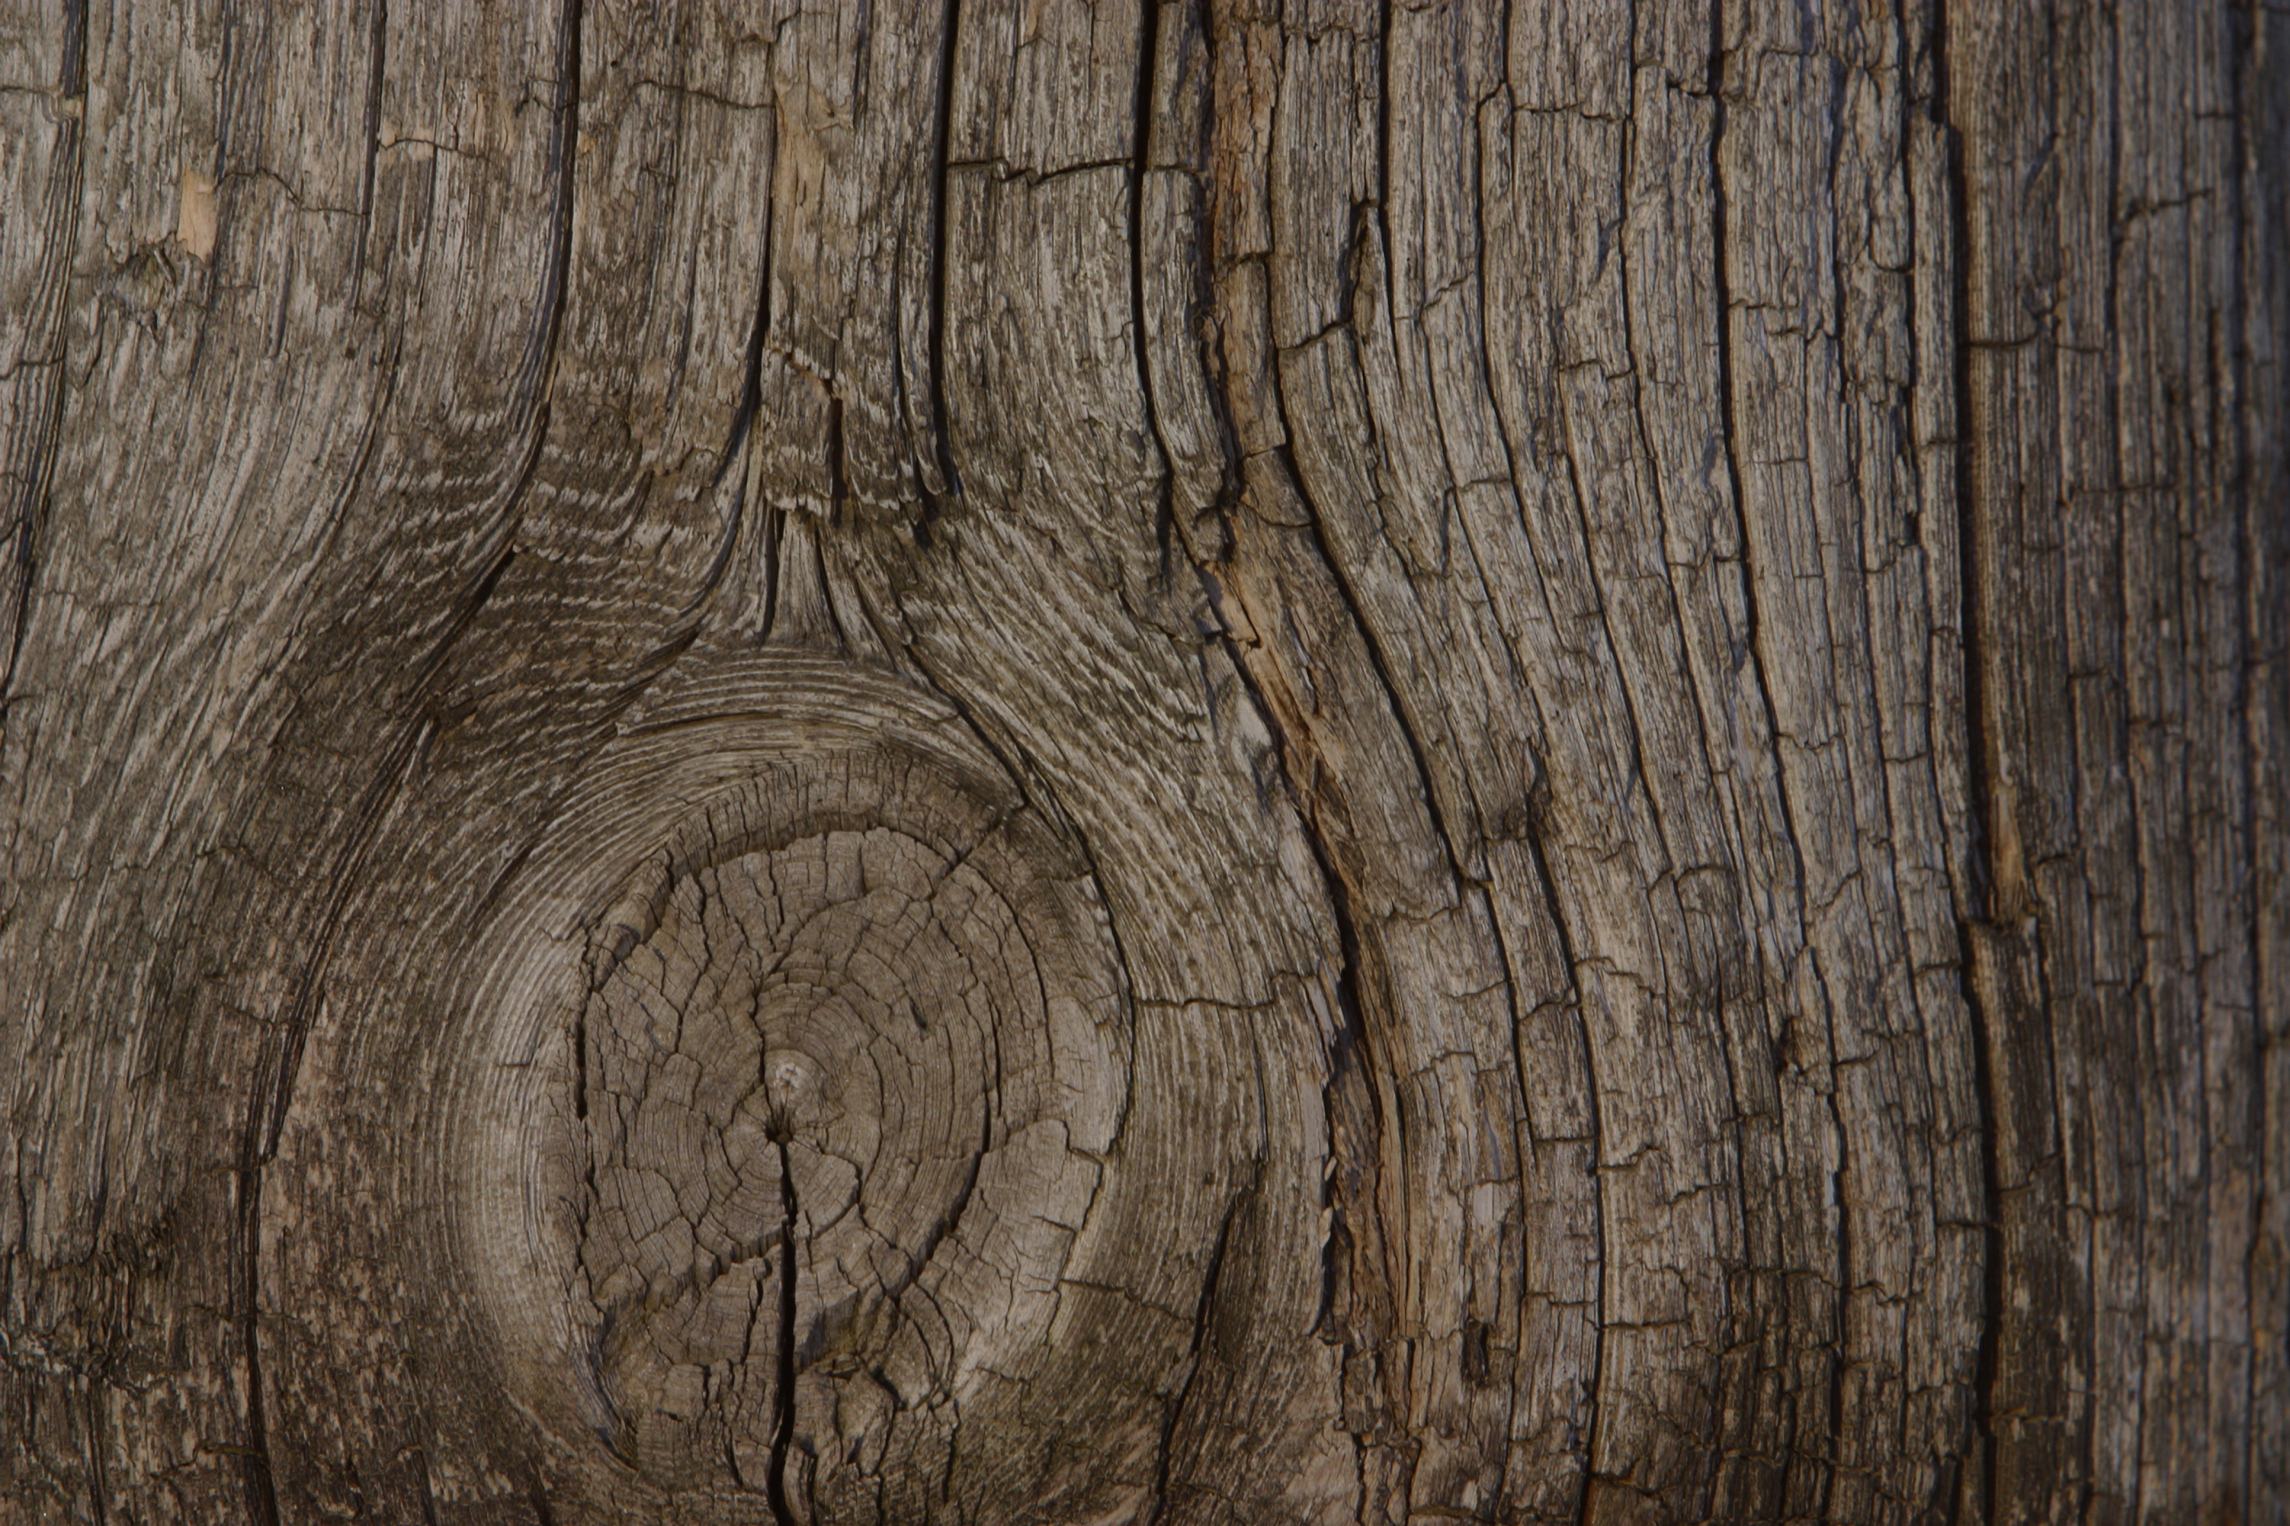 How to Gain a Wood Grain Look From Canvas